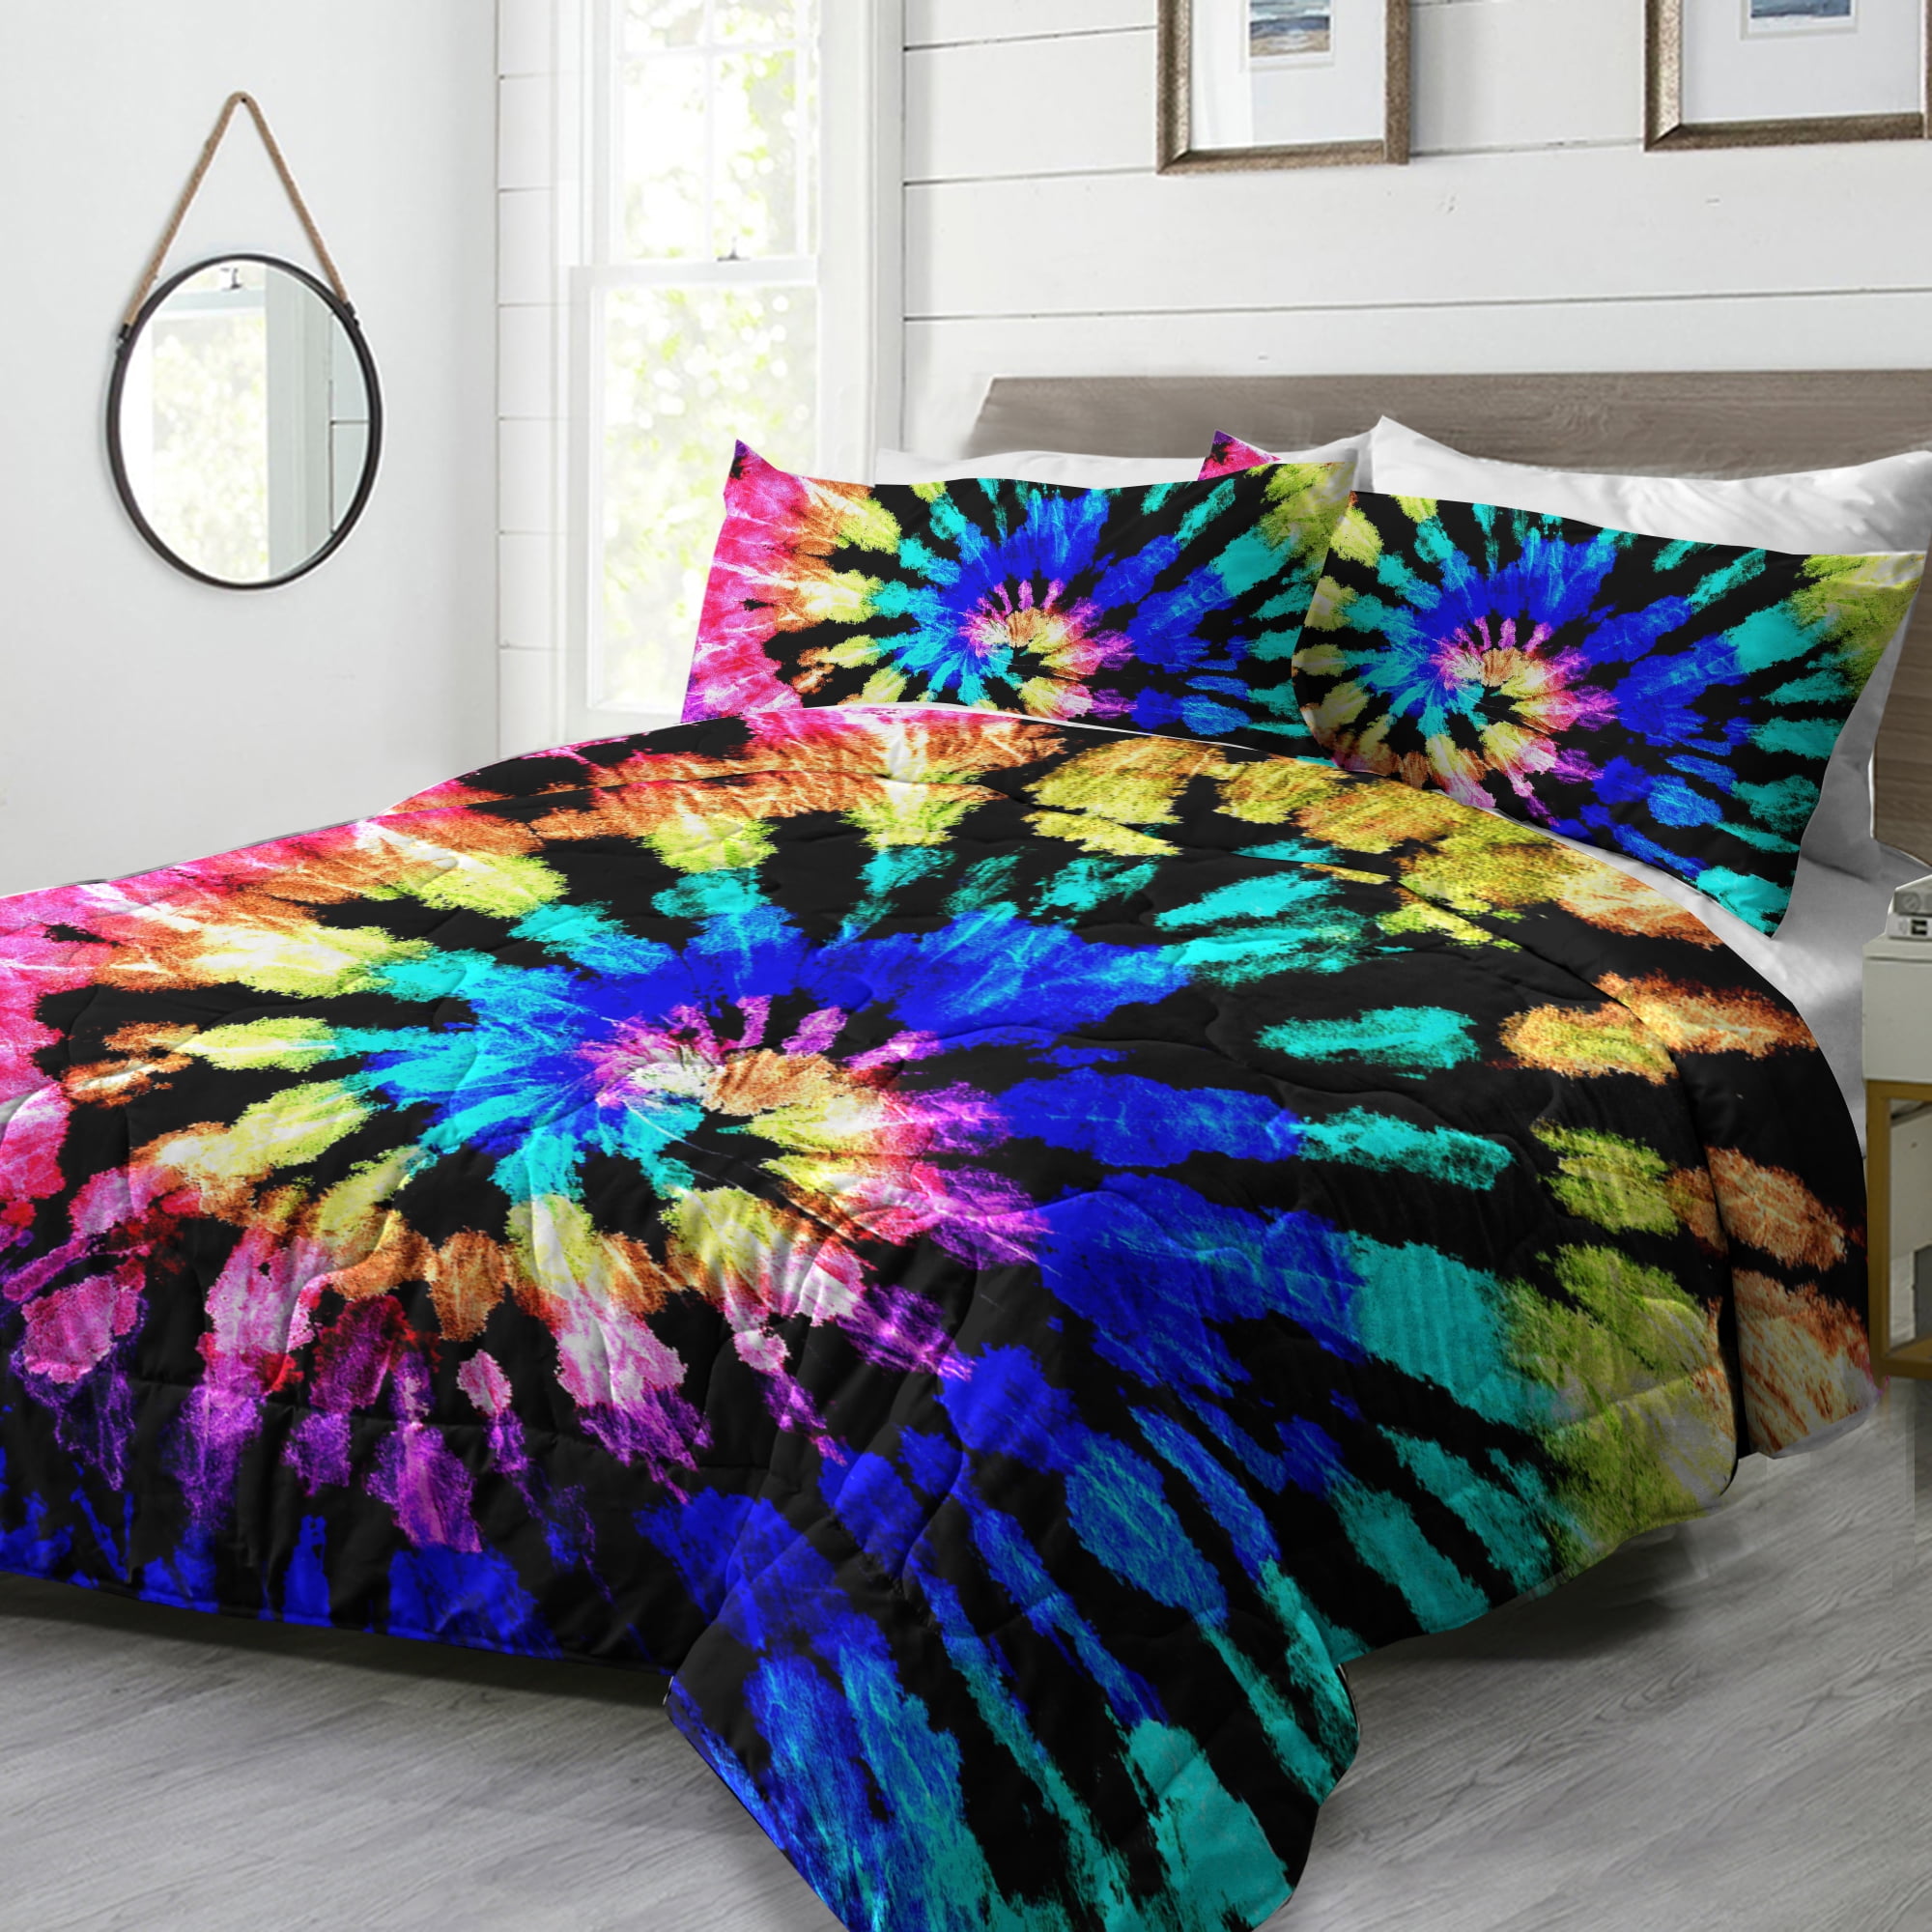 Blue Purple,3 Piece 1 Quilt with 2 Pillow Shams BlessLiving Tie Dye Comforter Set Trippy Bedding Hippie Gypsy Bed Sets Bohemian Comforter Full/Queen Size Psychedelic Blanket for Boys Men 